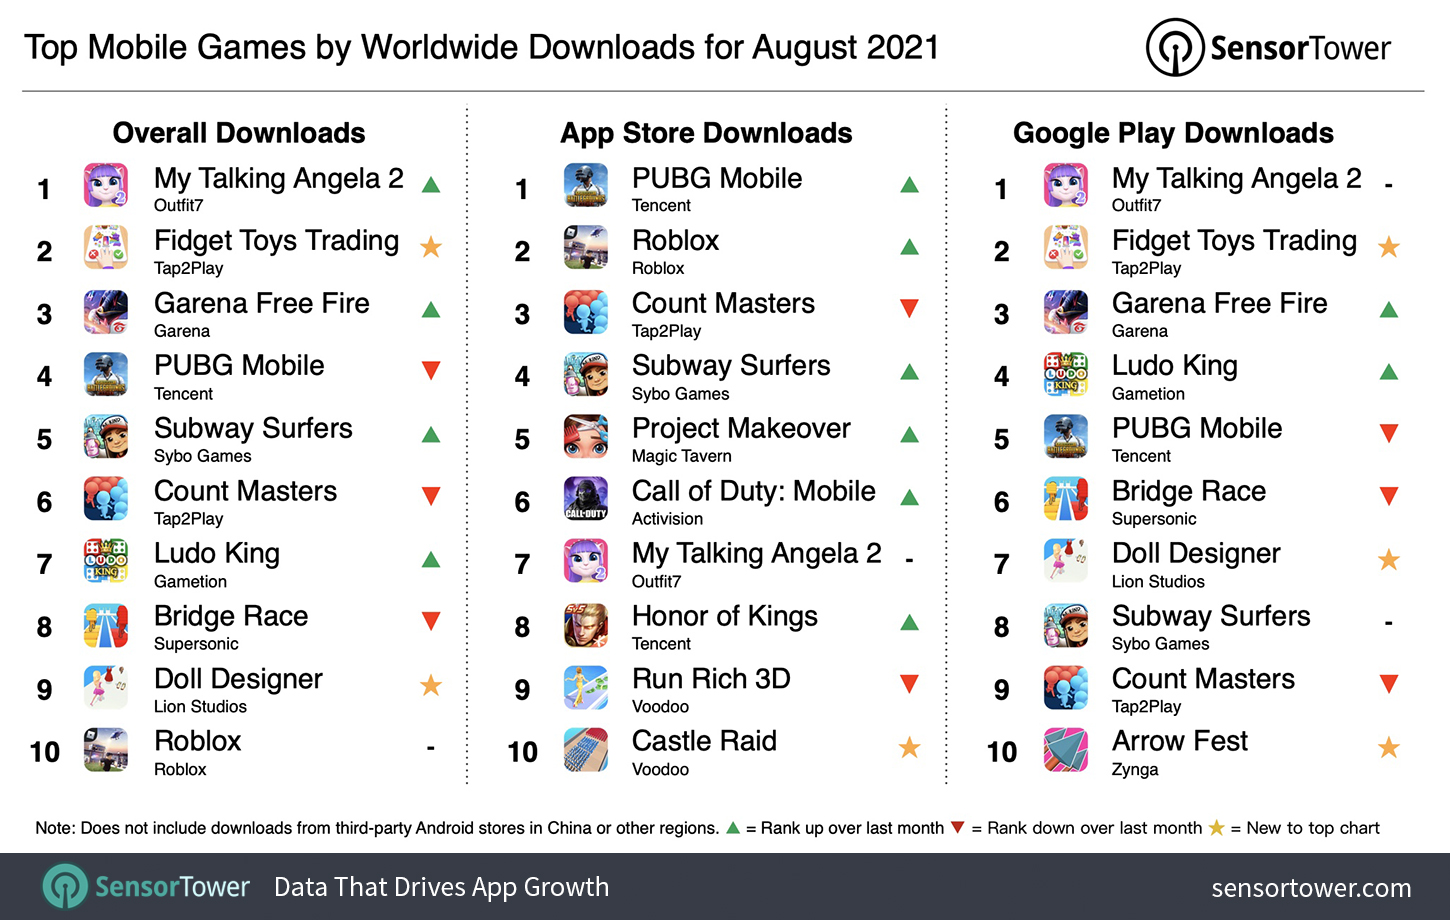 Top Mobile Games Worldwide for October 2021 by Downloads